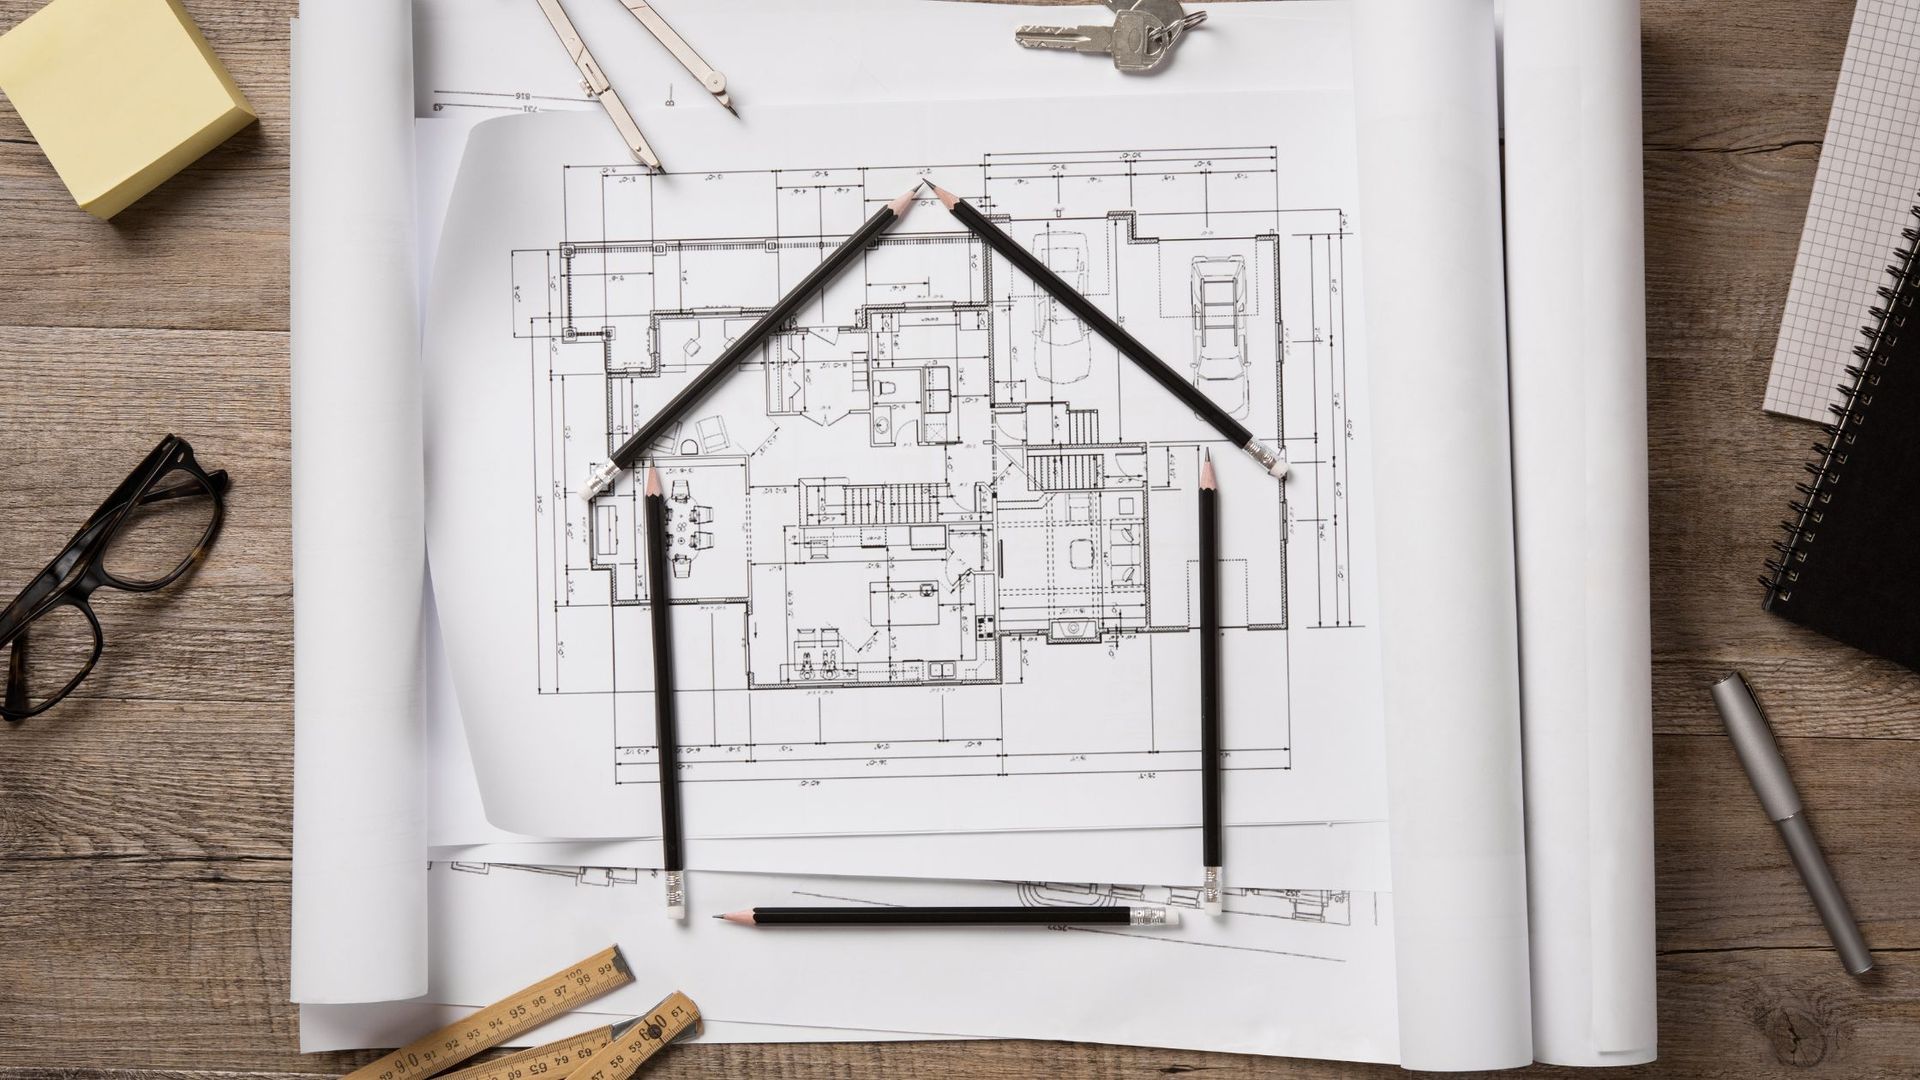 Home plans - why you may want to seriously consider a newly built home